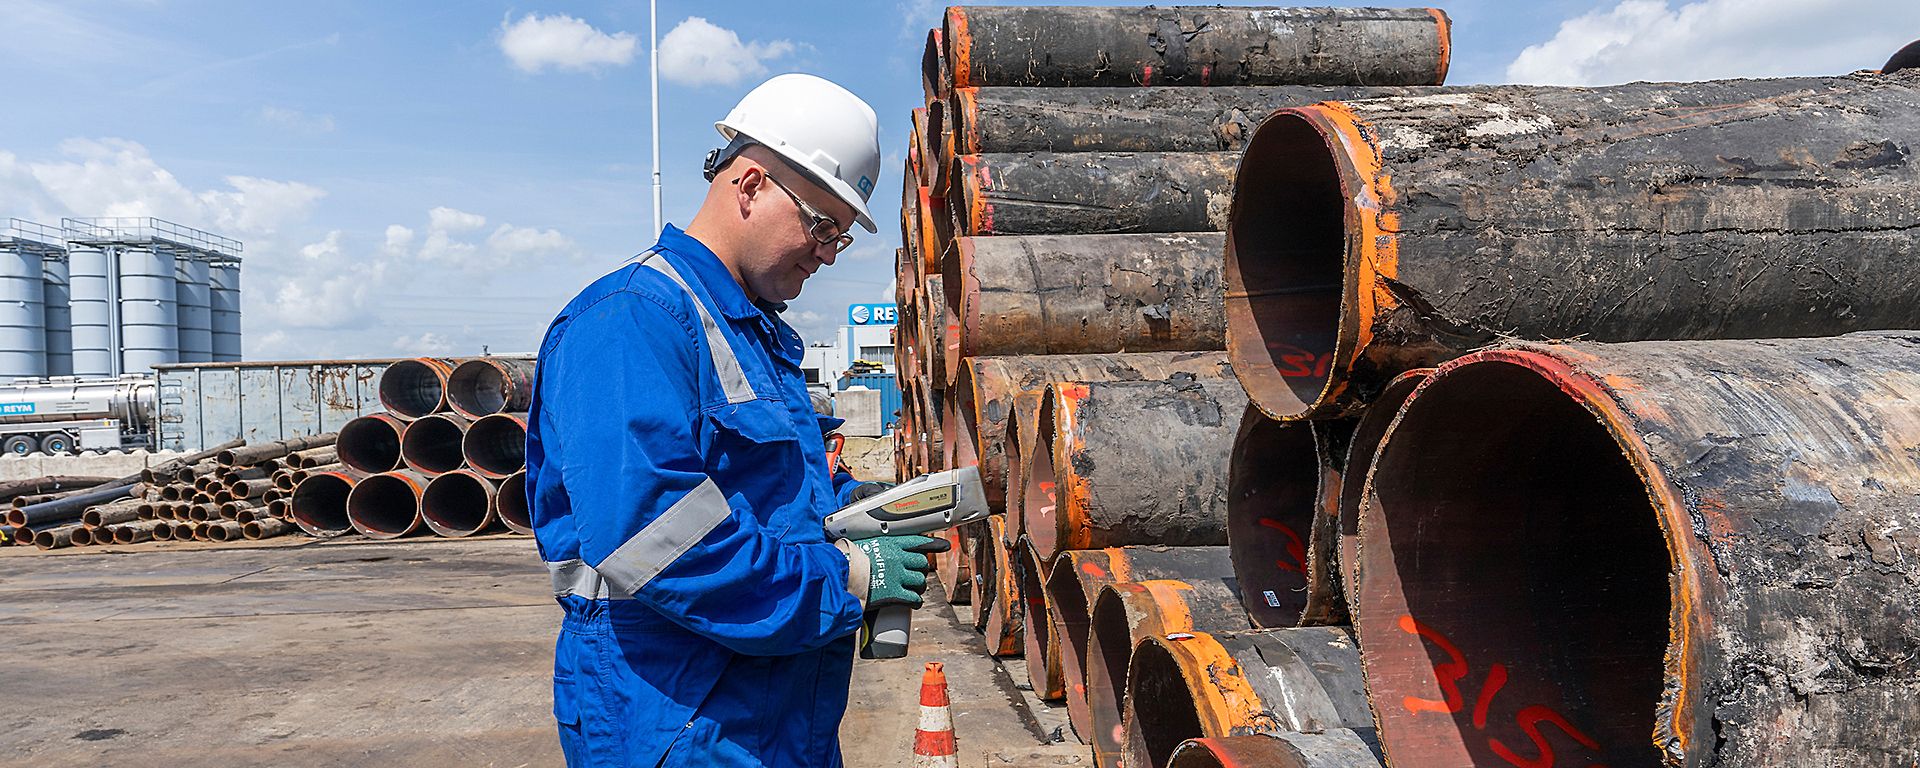 REYM works in the oil, gas and petrochemical industry